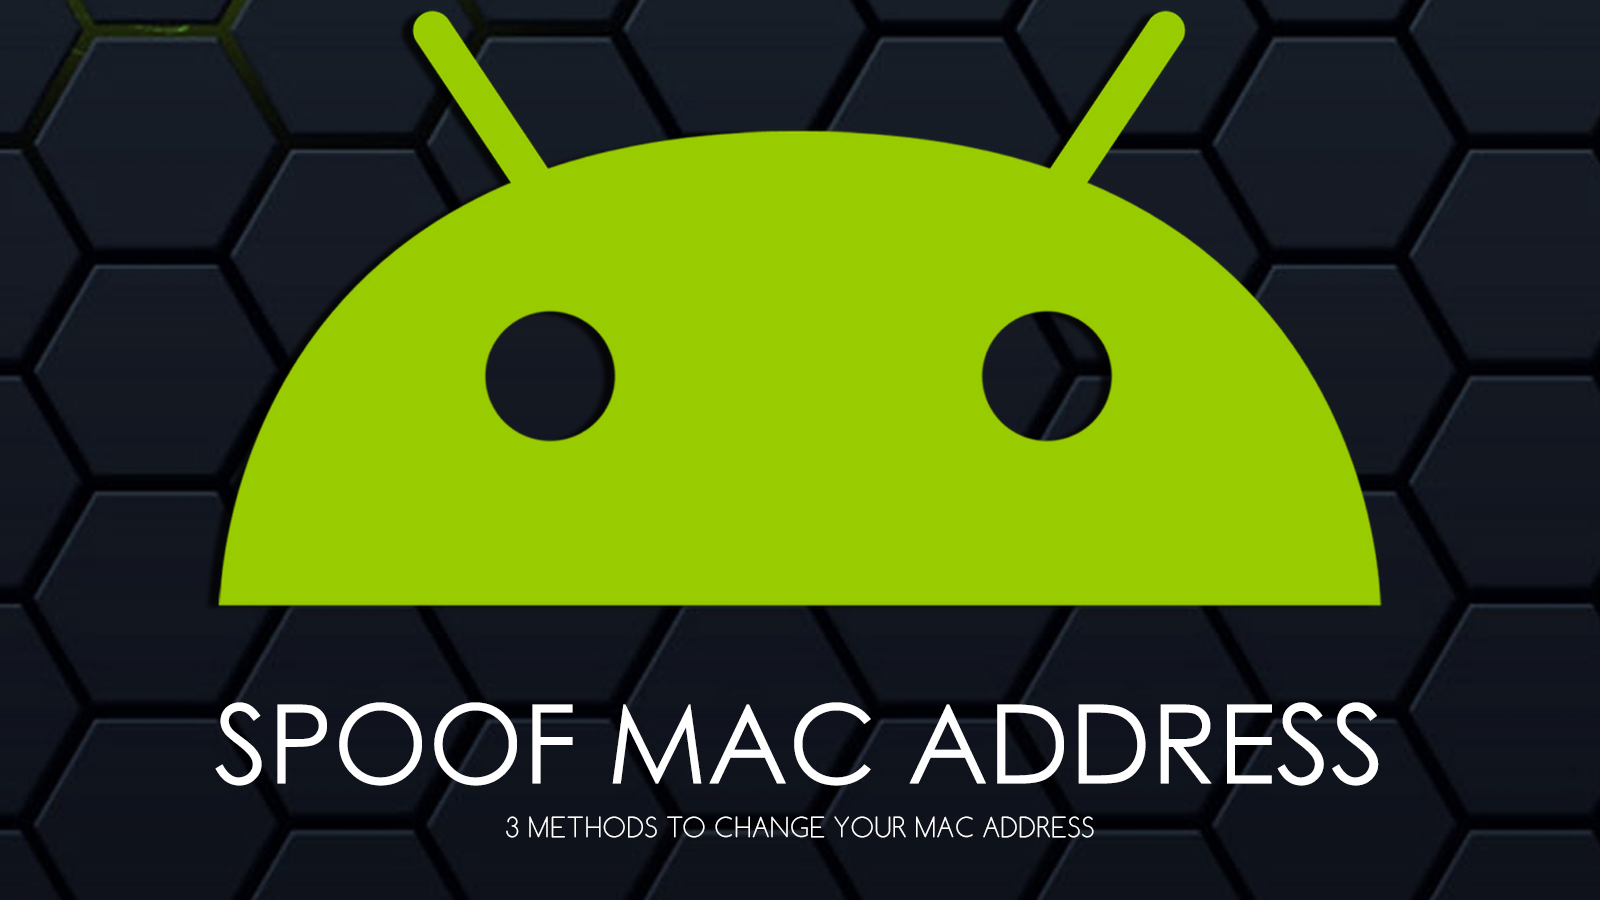 Mac Address Spoofing Tool For Windows 8